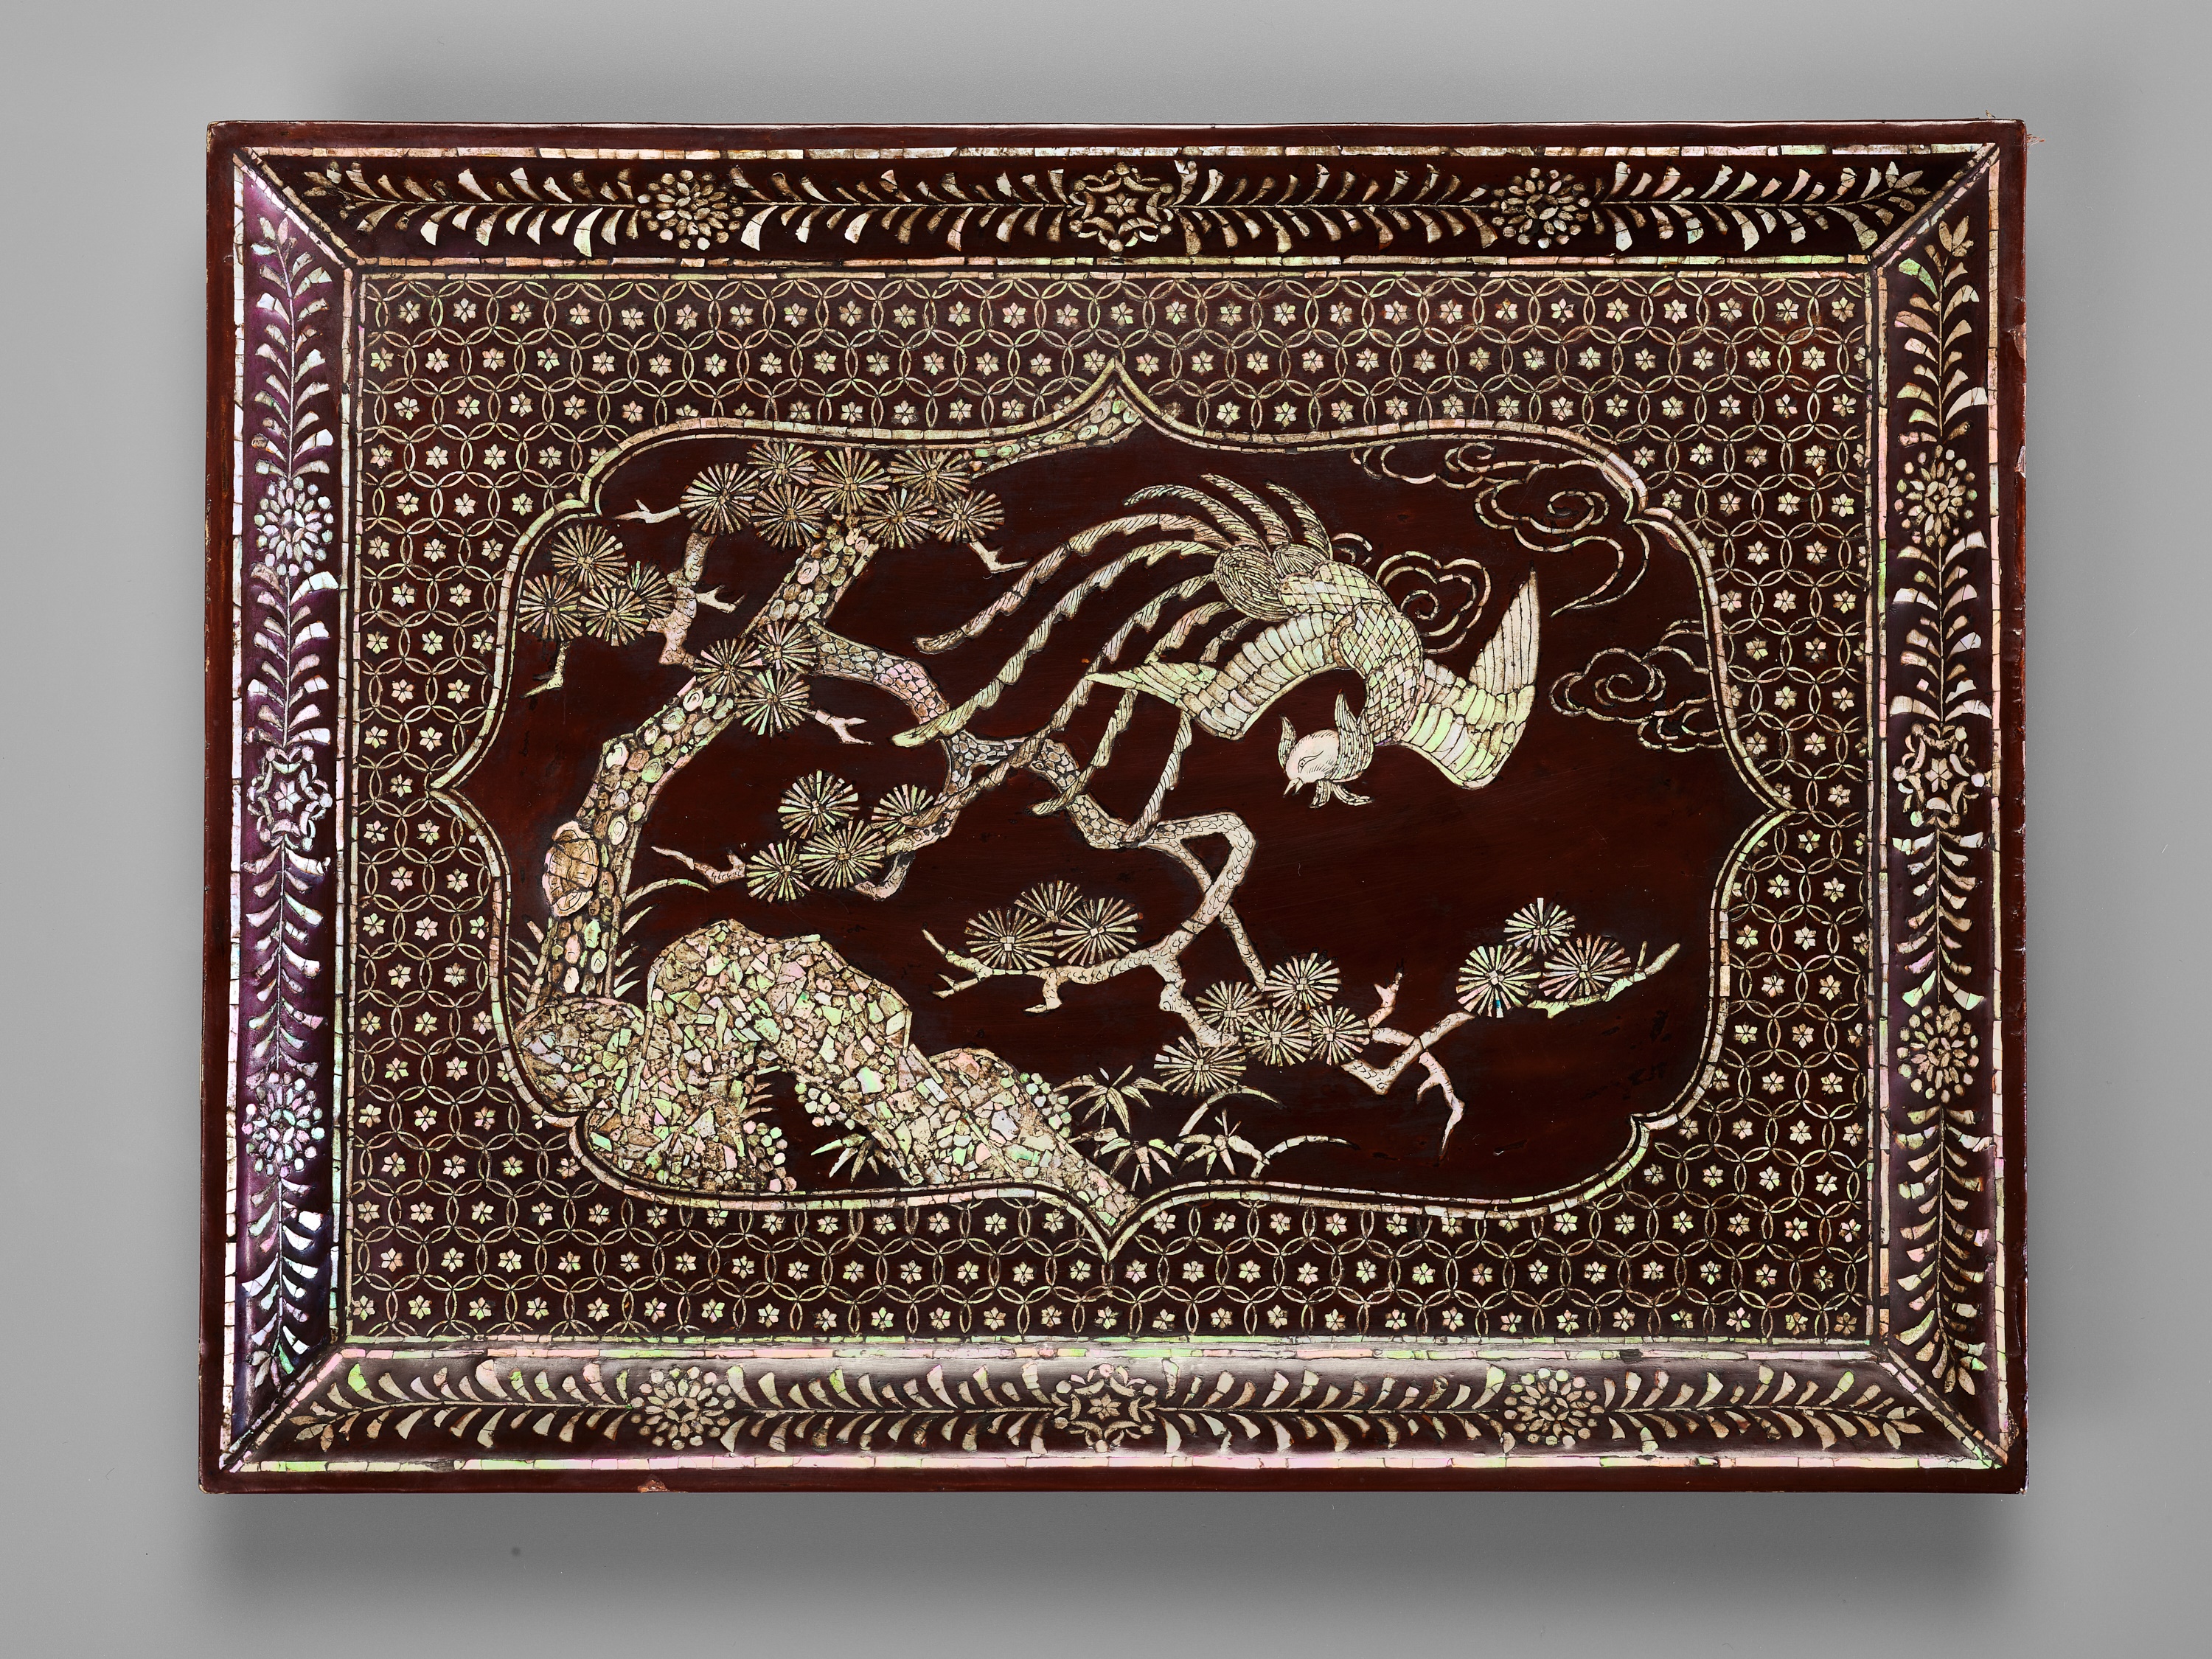 A RARE INLAID LACQUER 'PHOENIX' TRAY, MING DYNASTY - Image 7 of 8